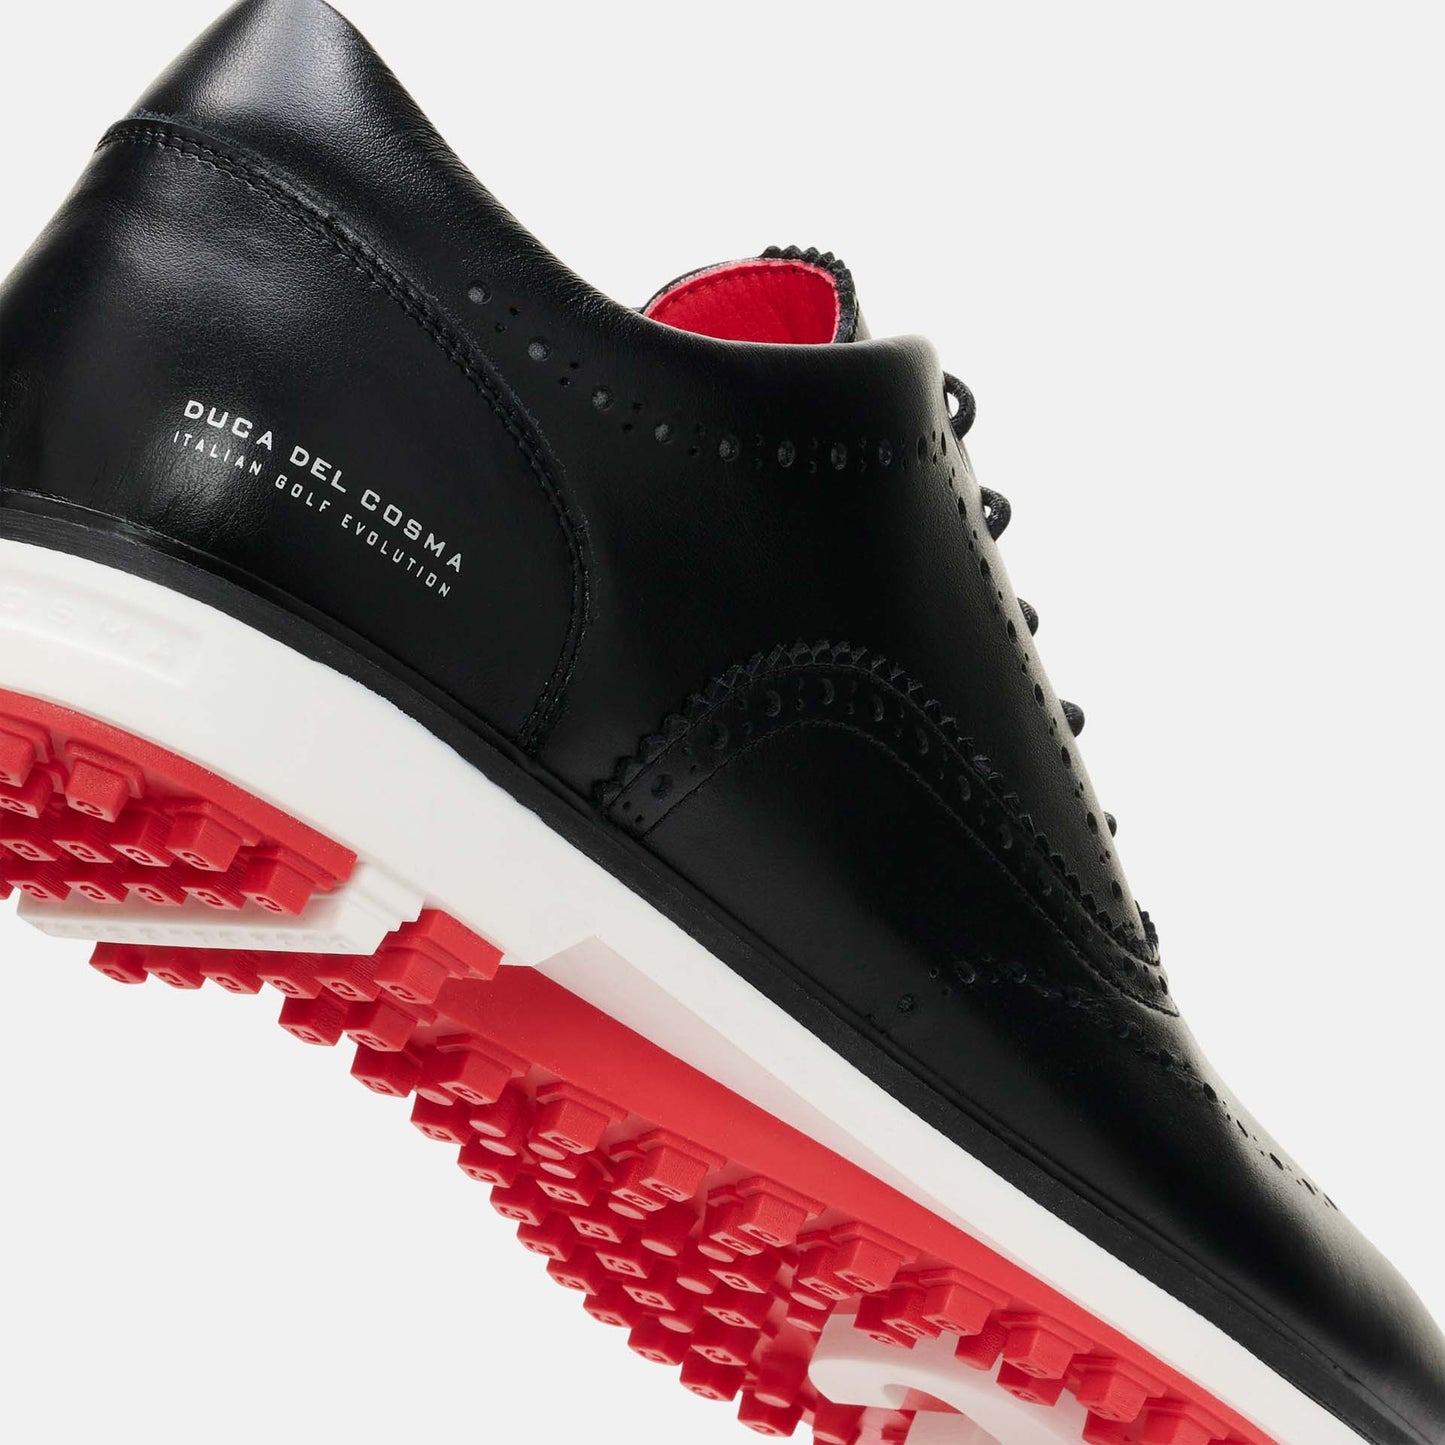 Black Golf Shoes, Waterproof Golf Shoes, Spikeless Golf Shoes, Duca del Cosma Men's Golf Shoes, Classic golf shoes.